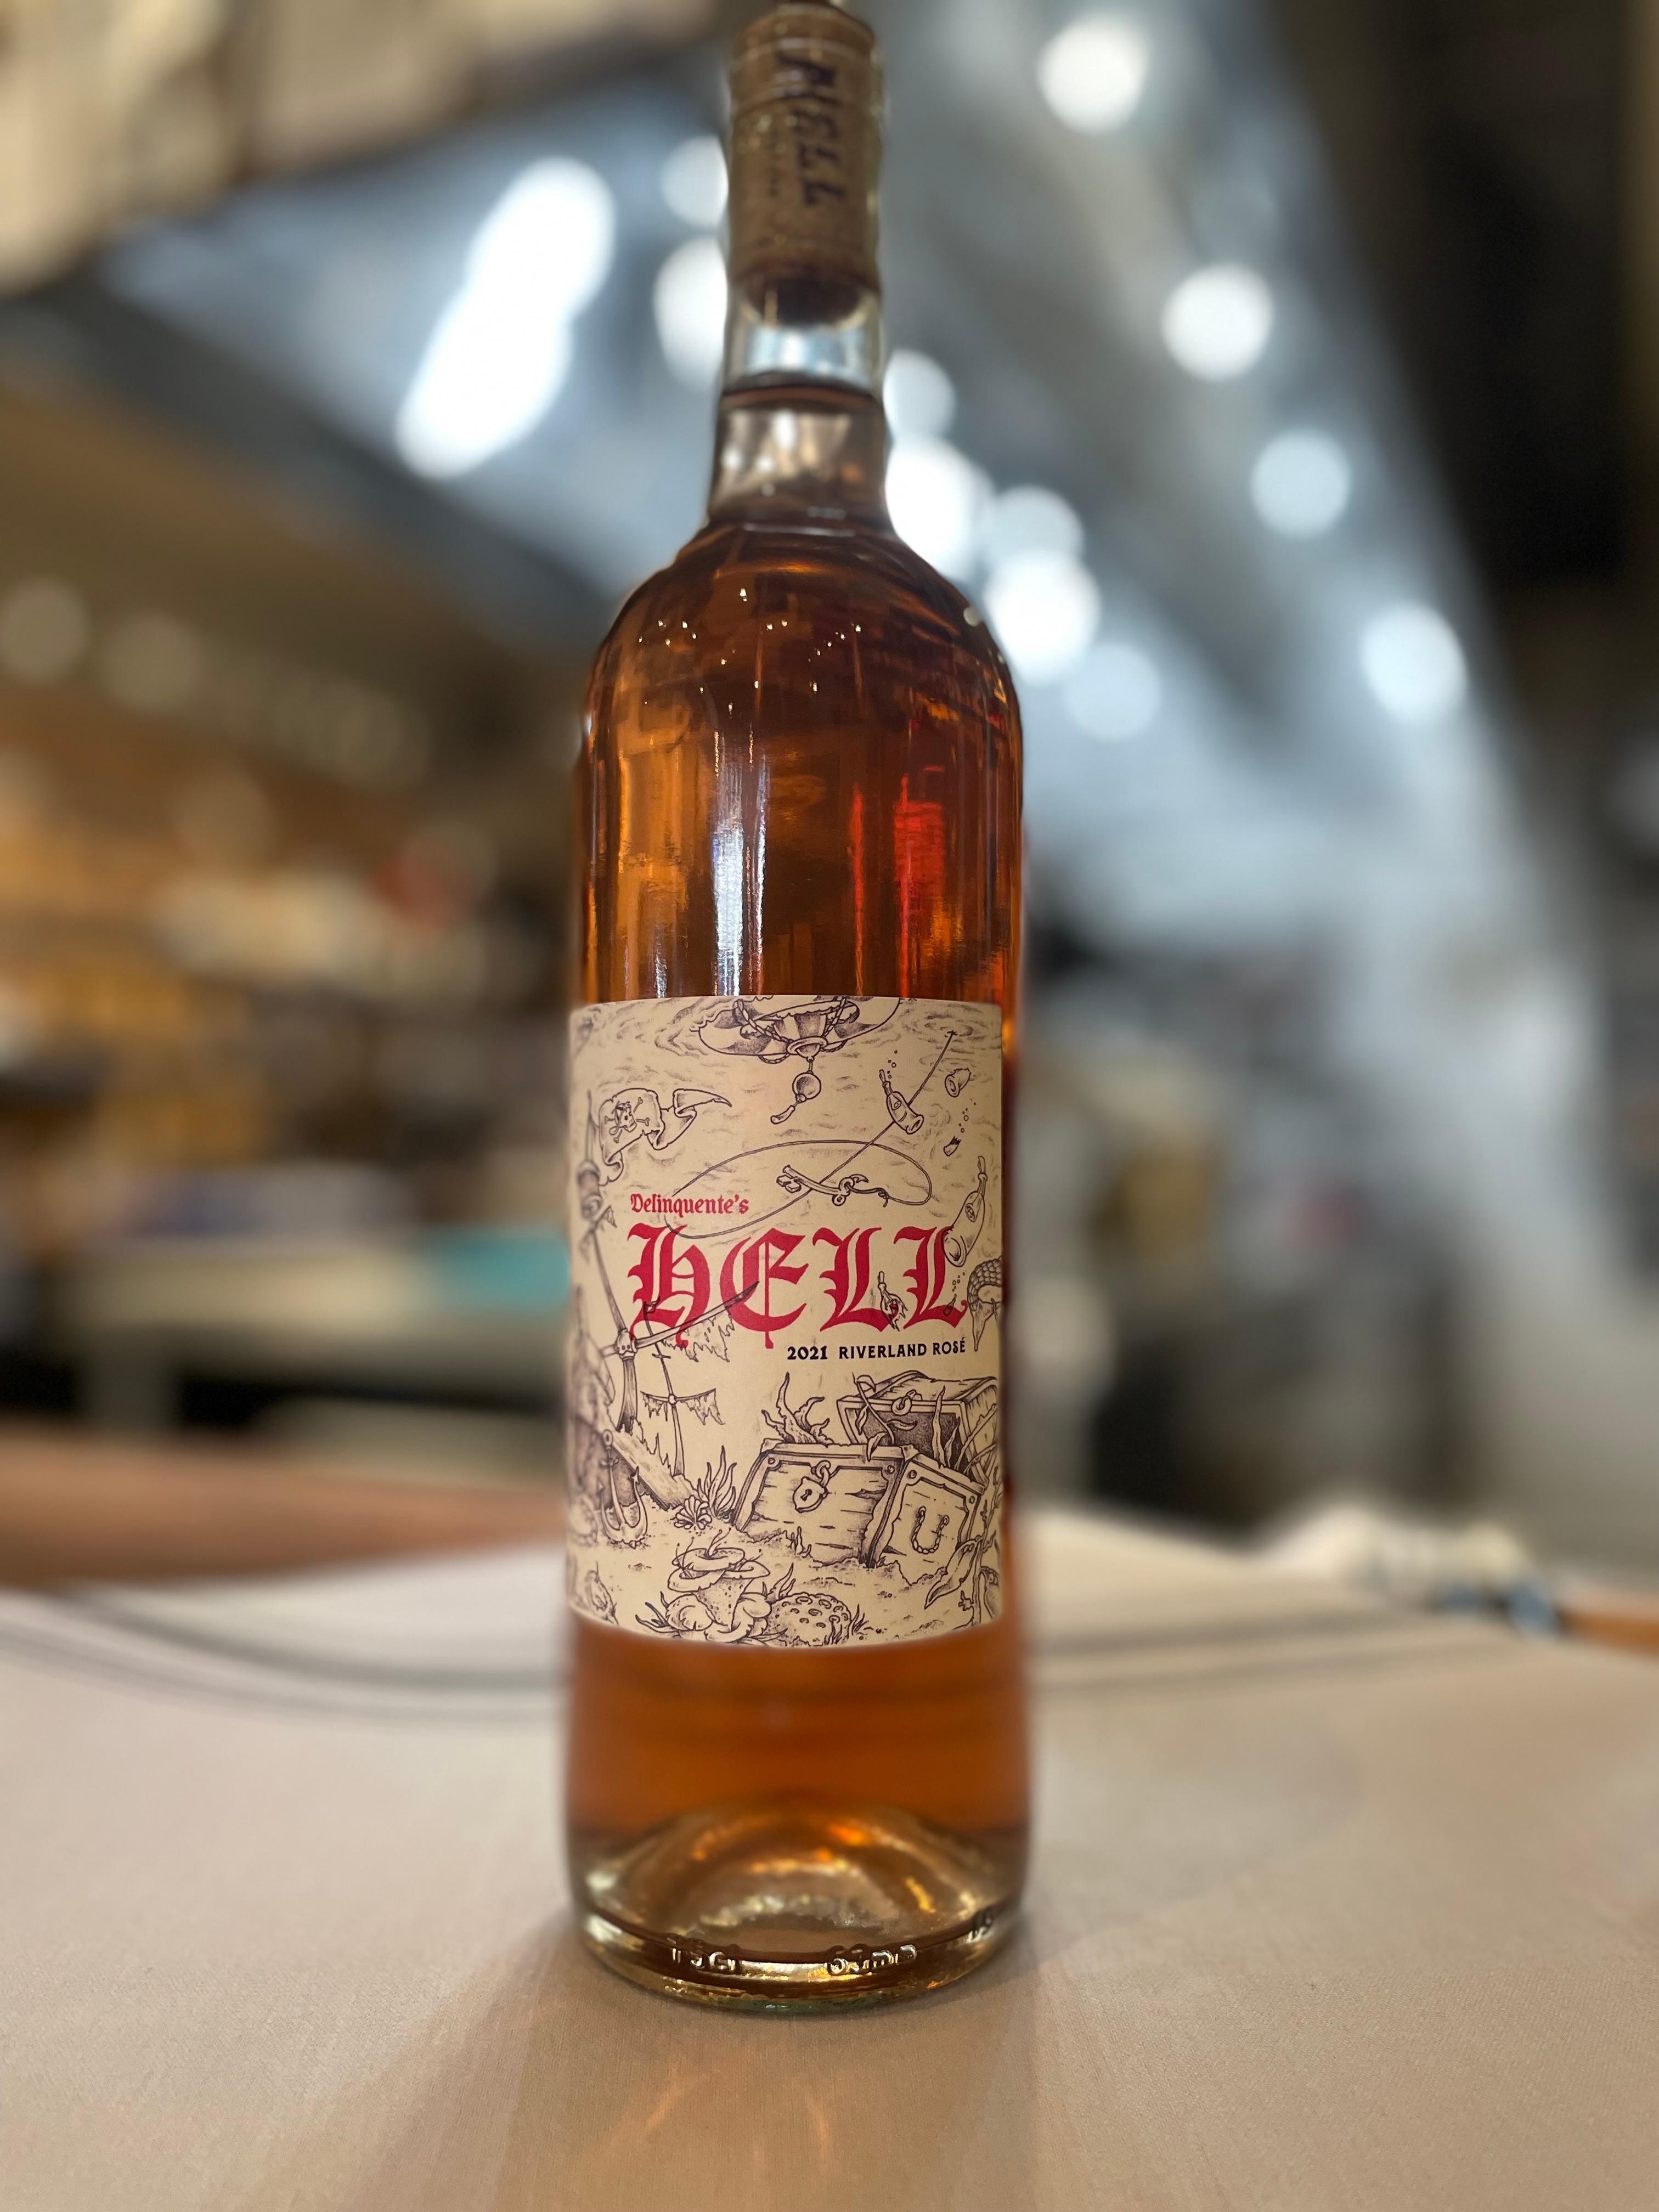 Delinquente's "Hell" 2021 Riverland Rosé